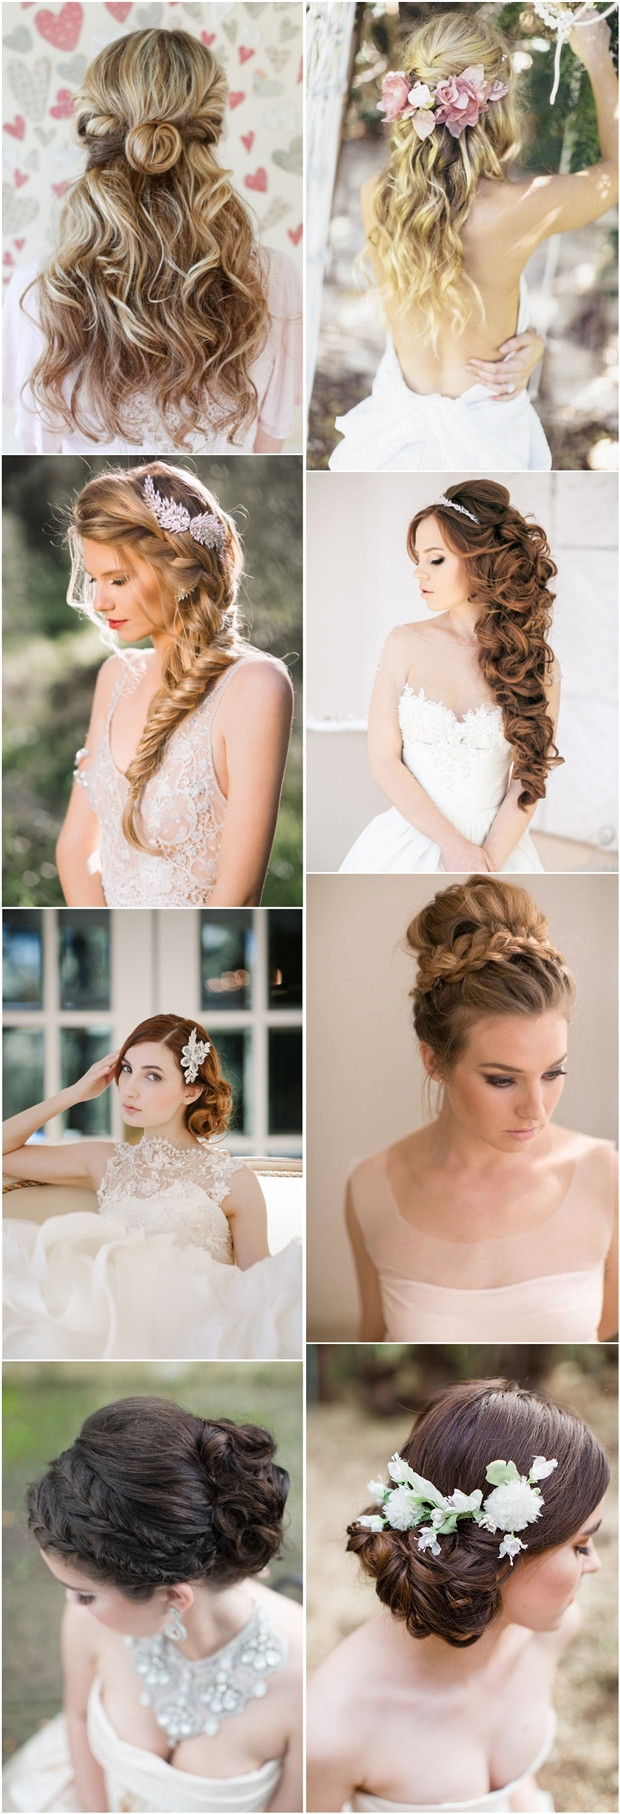 Wedding Hairstyle Half Updo
 20 Fabulous Wedding Hairstyles for Every Bride